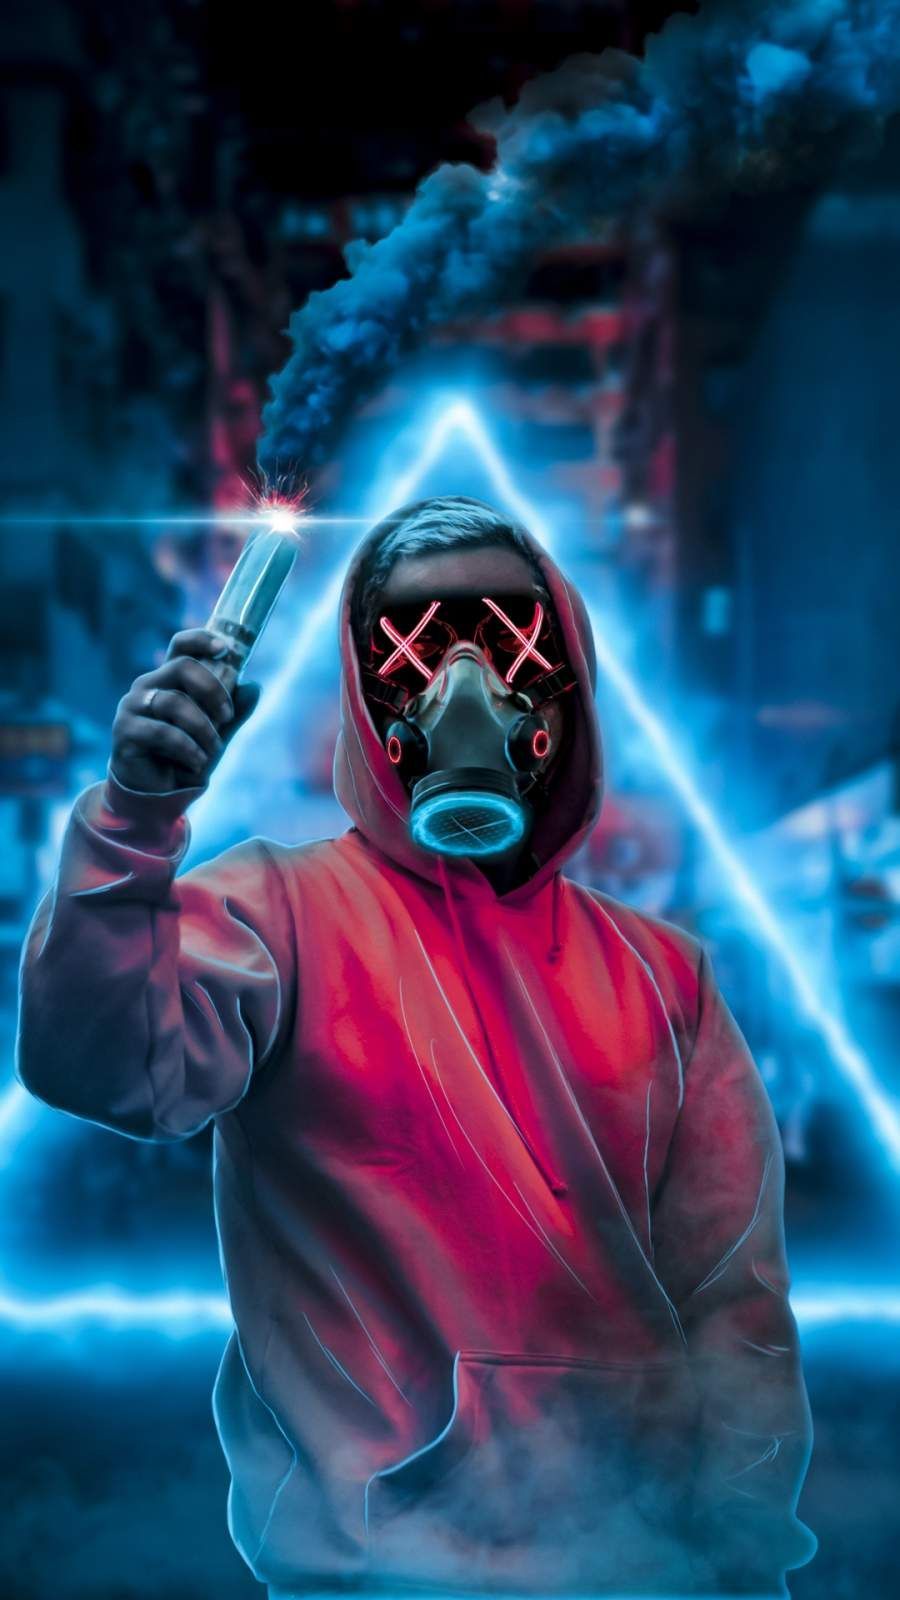 Face Mask Smoke Bomb iPhone Wallpaper. Cool wallpaper for phones